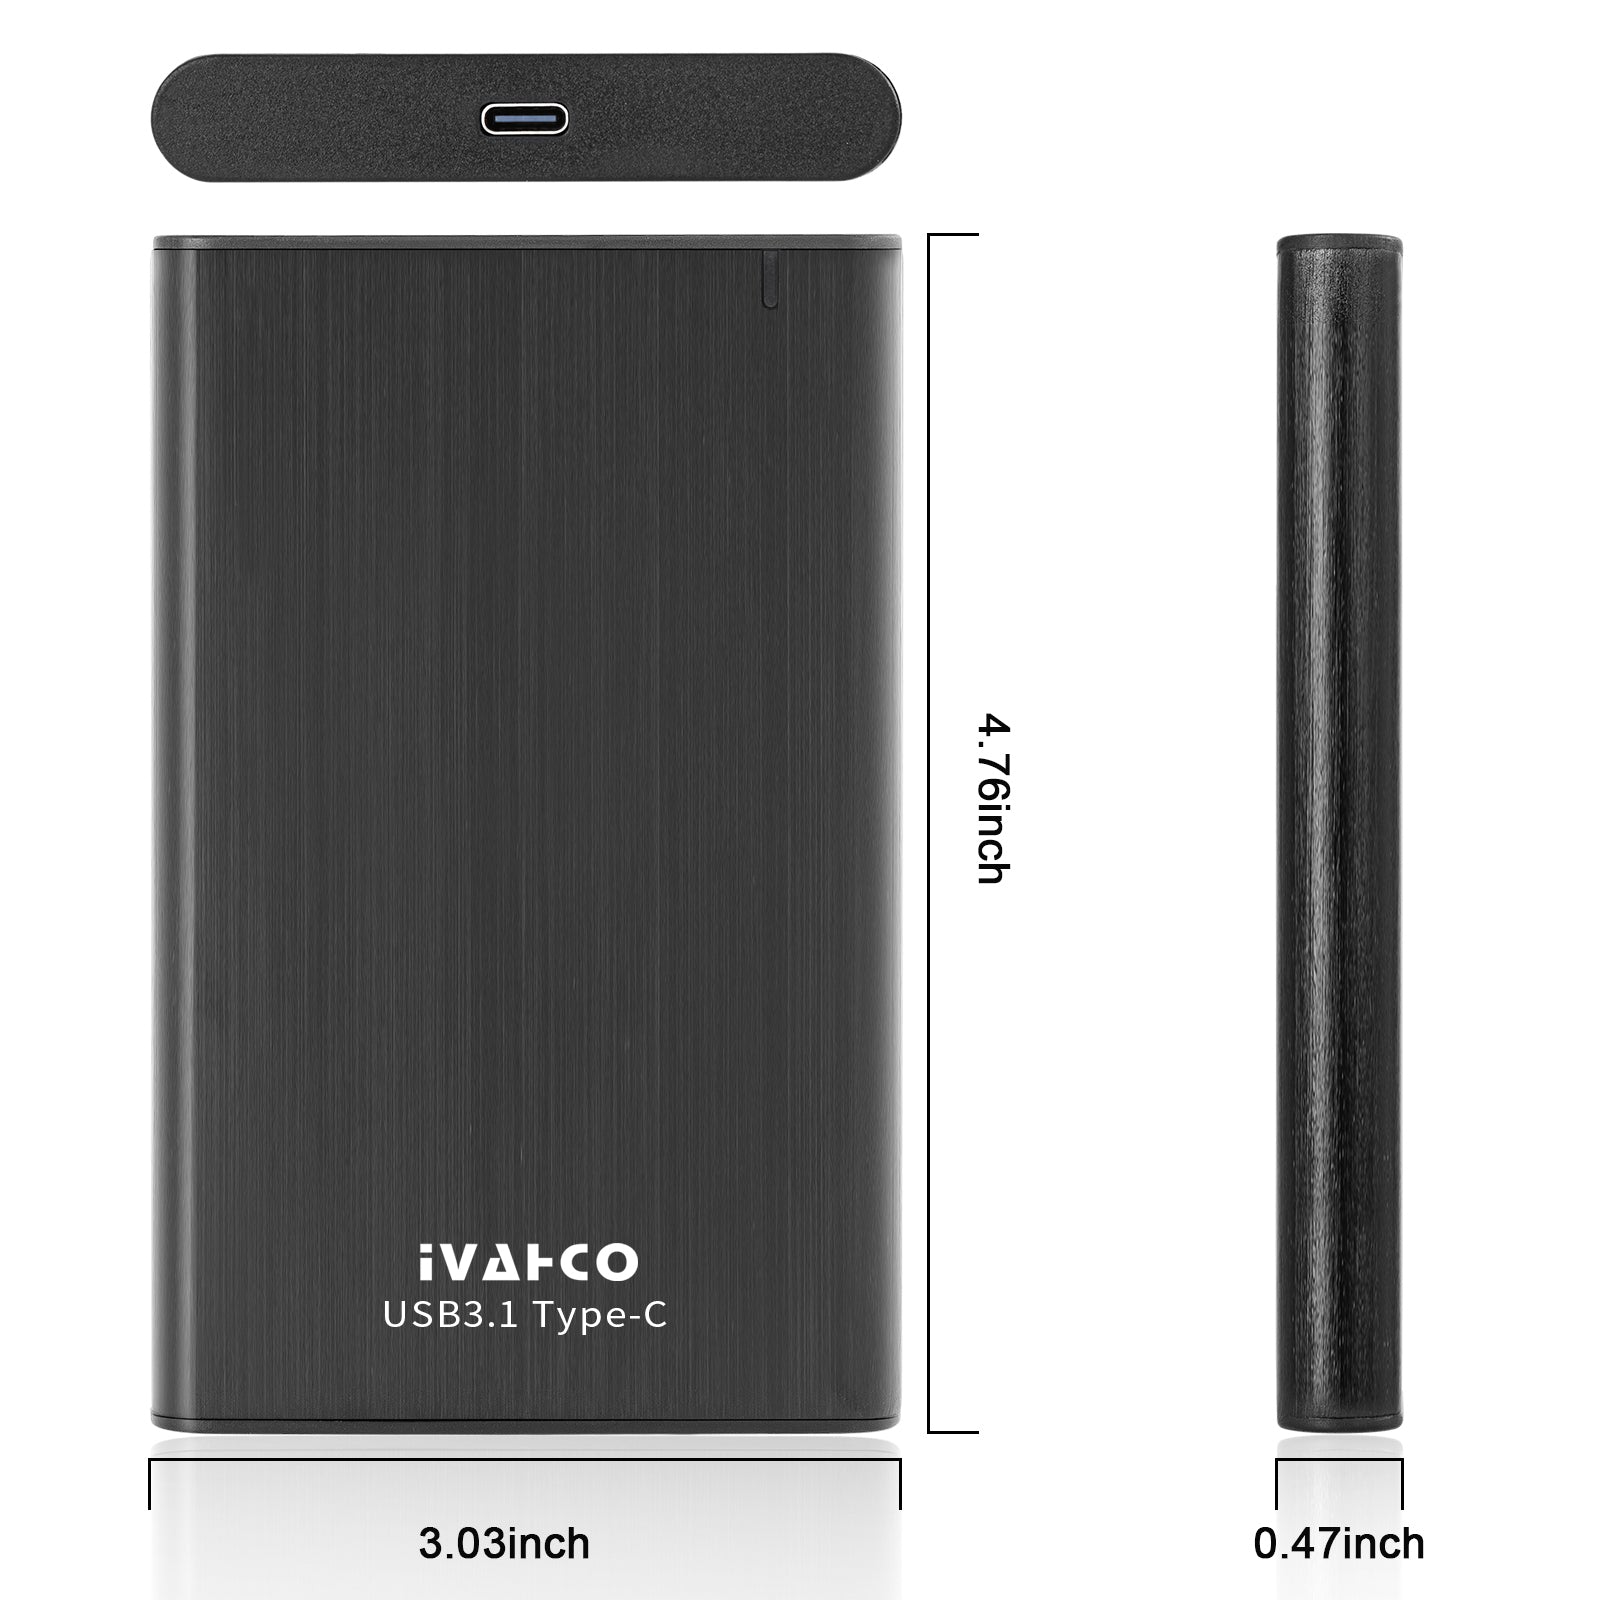 IVAHCO 1TB Type-C USB3.1 2.5" HDD External Case Plug and Play Brushed Metal Solid State Drive Enclosure - Red